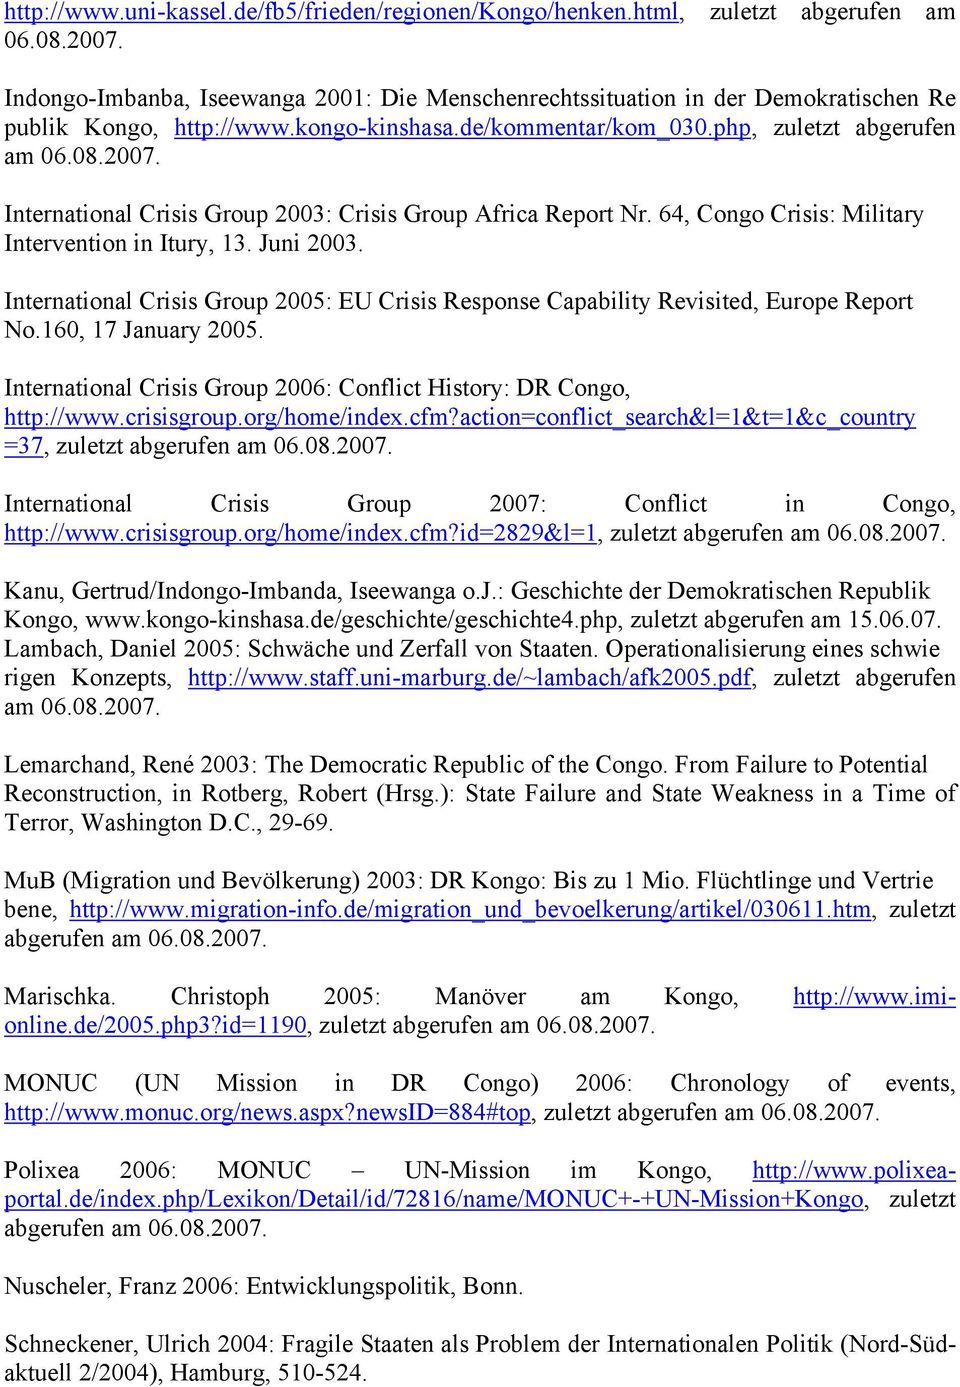 International Crisis Group 2003: Crisis Group Africa Report Nr. 64, Congo Crisis: Military Intervention in Itury, 13. Juni 2003.